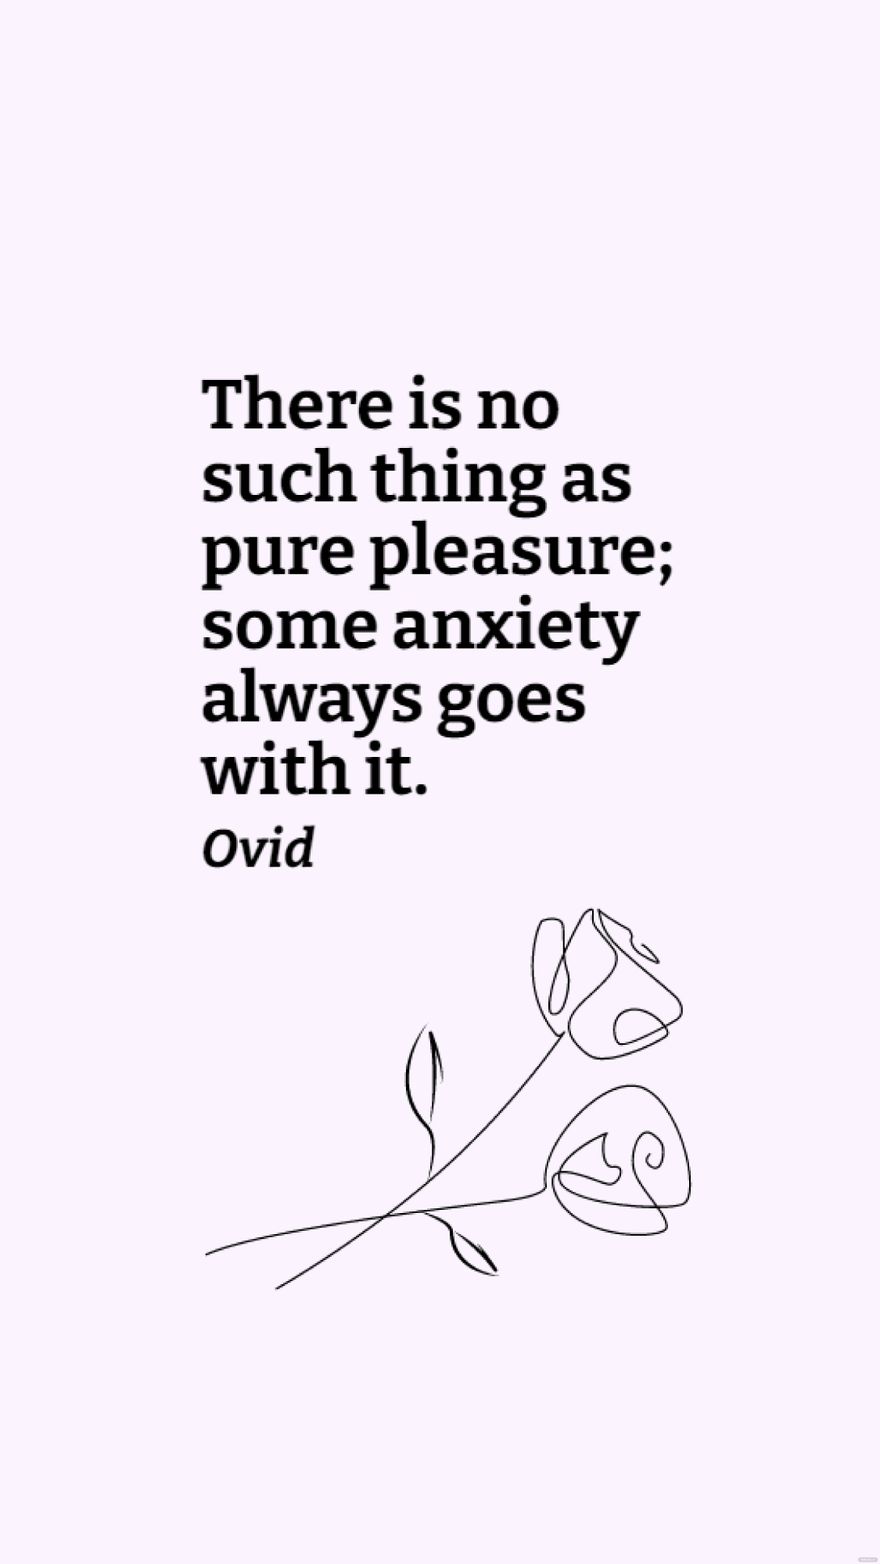 Free Ovid - There is no such thing as pure pleasure; some anxiety always goes with it. in JPG